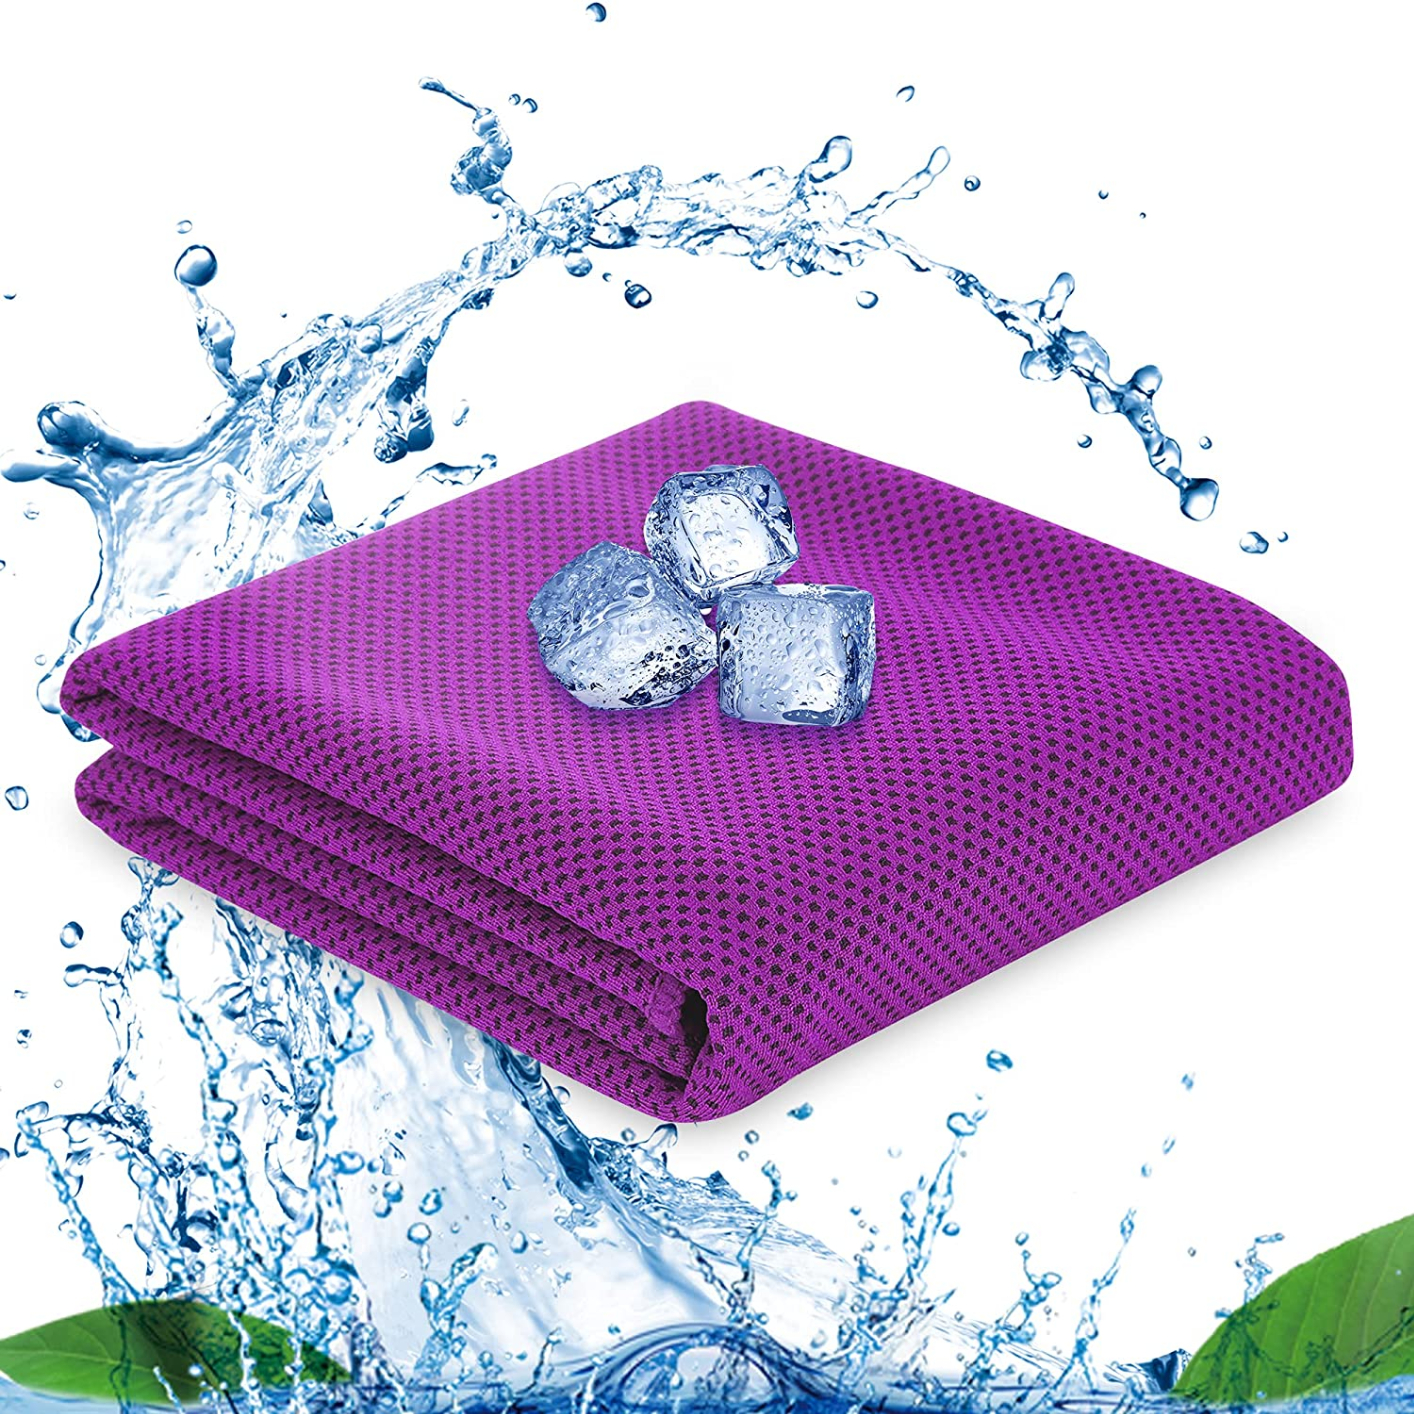 Microfiber Fitness Yoga Sports Outdoor Gym Cooling Towel